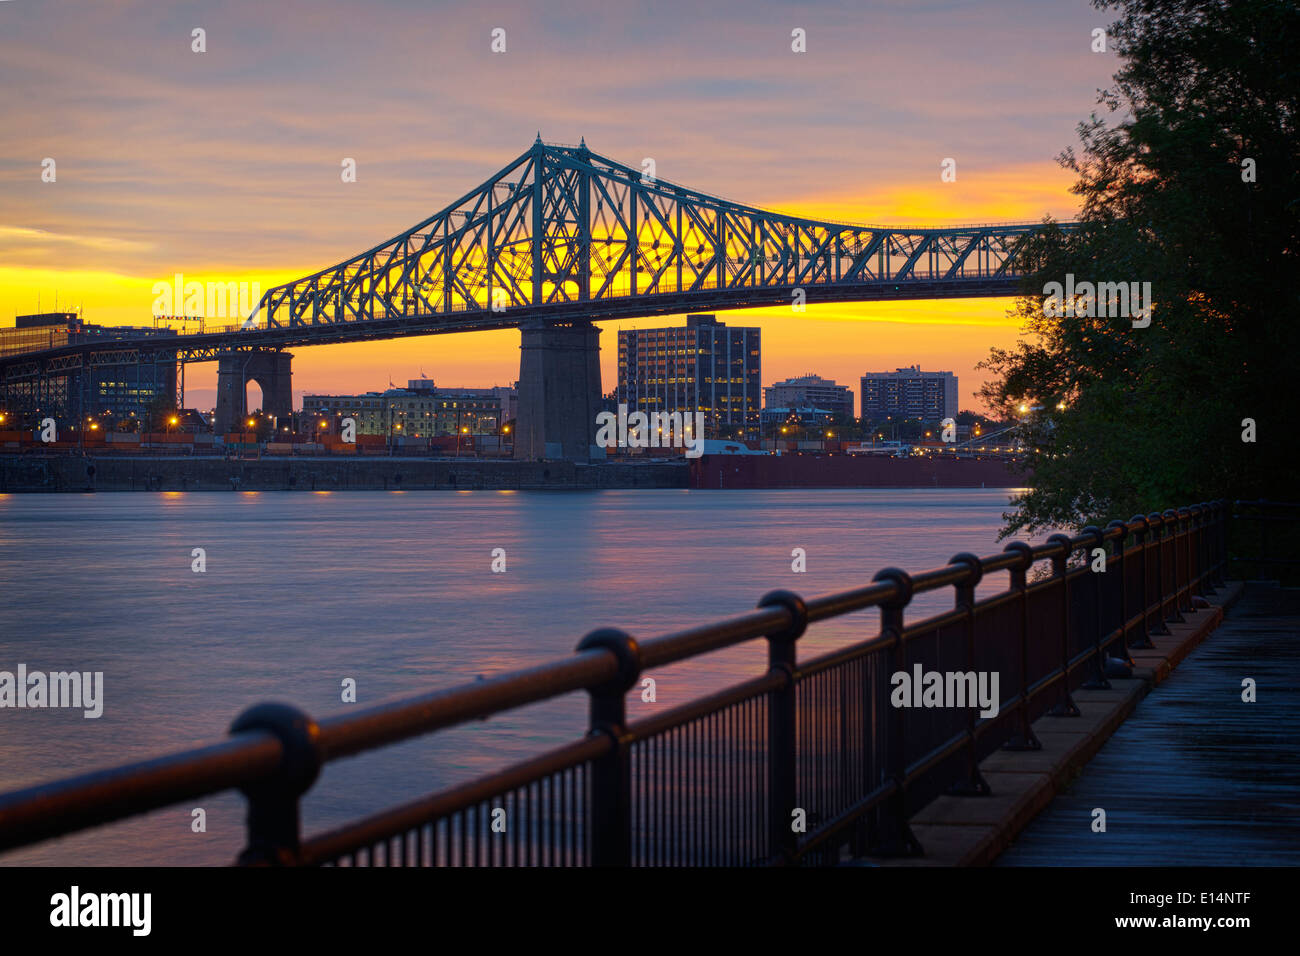 Montreal city skyline and bridge at sunset, Quebec, Canada Stock Photo